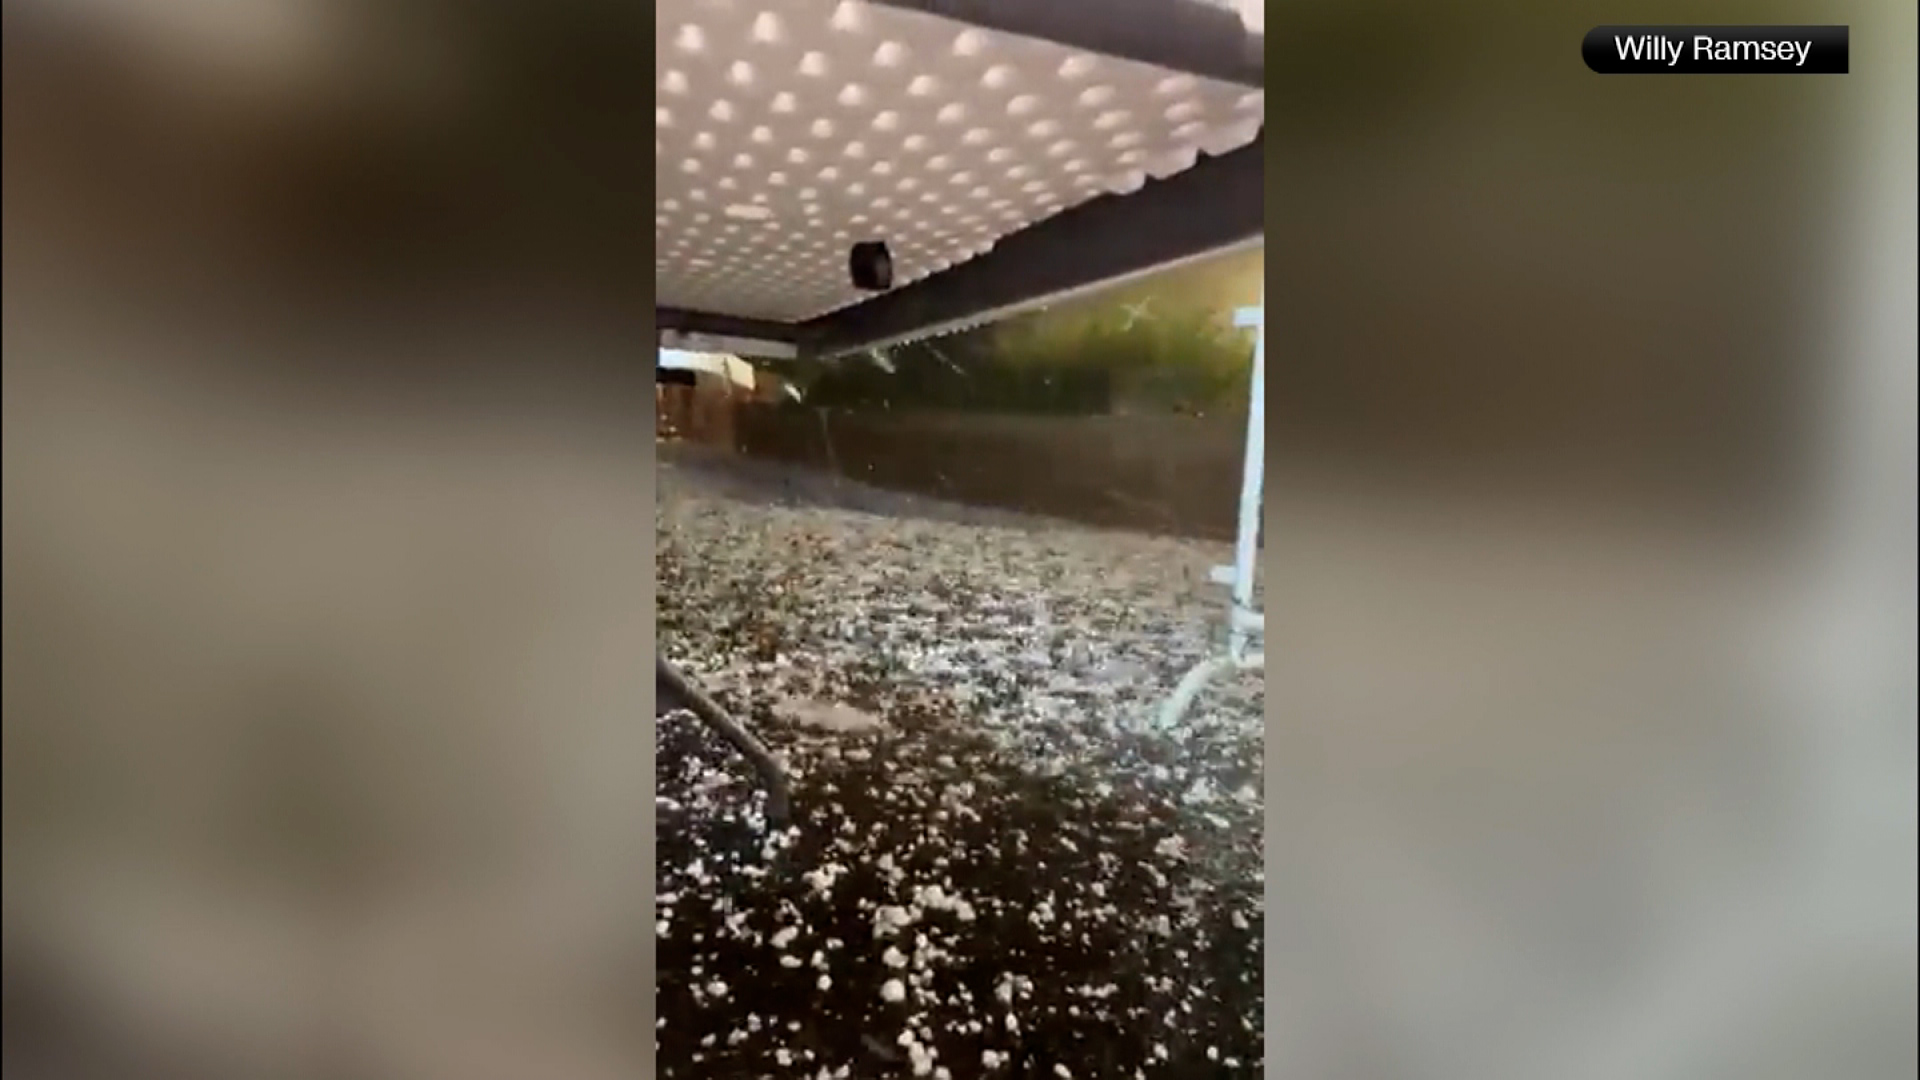 hail storm injures nearly 100 ahead of concert...